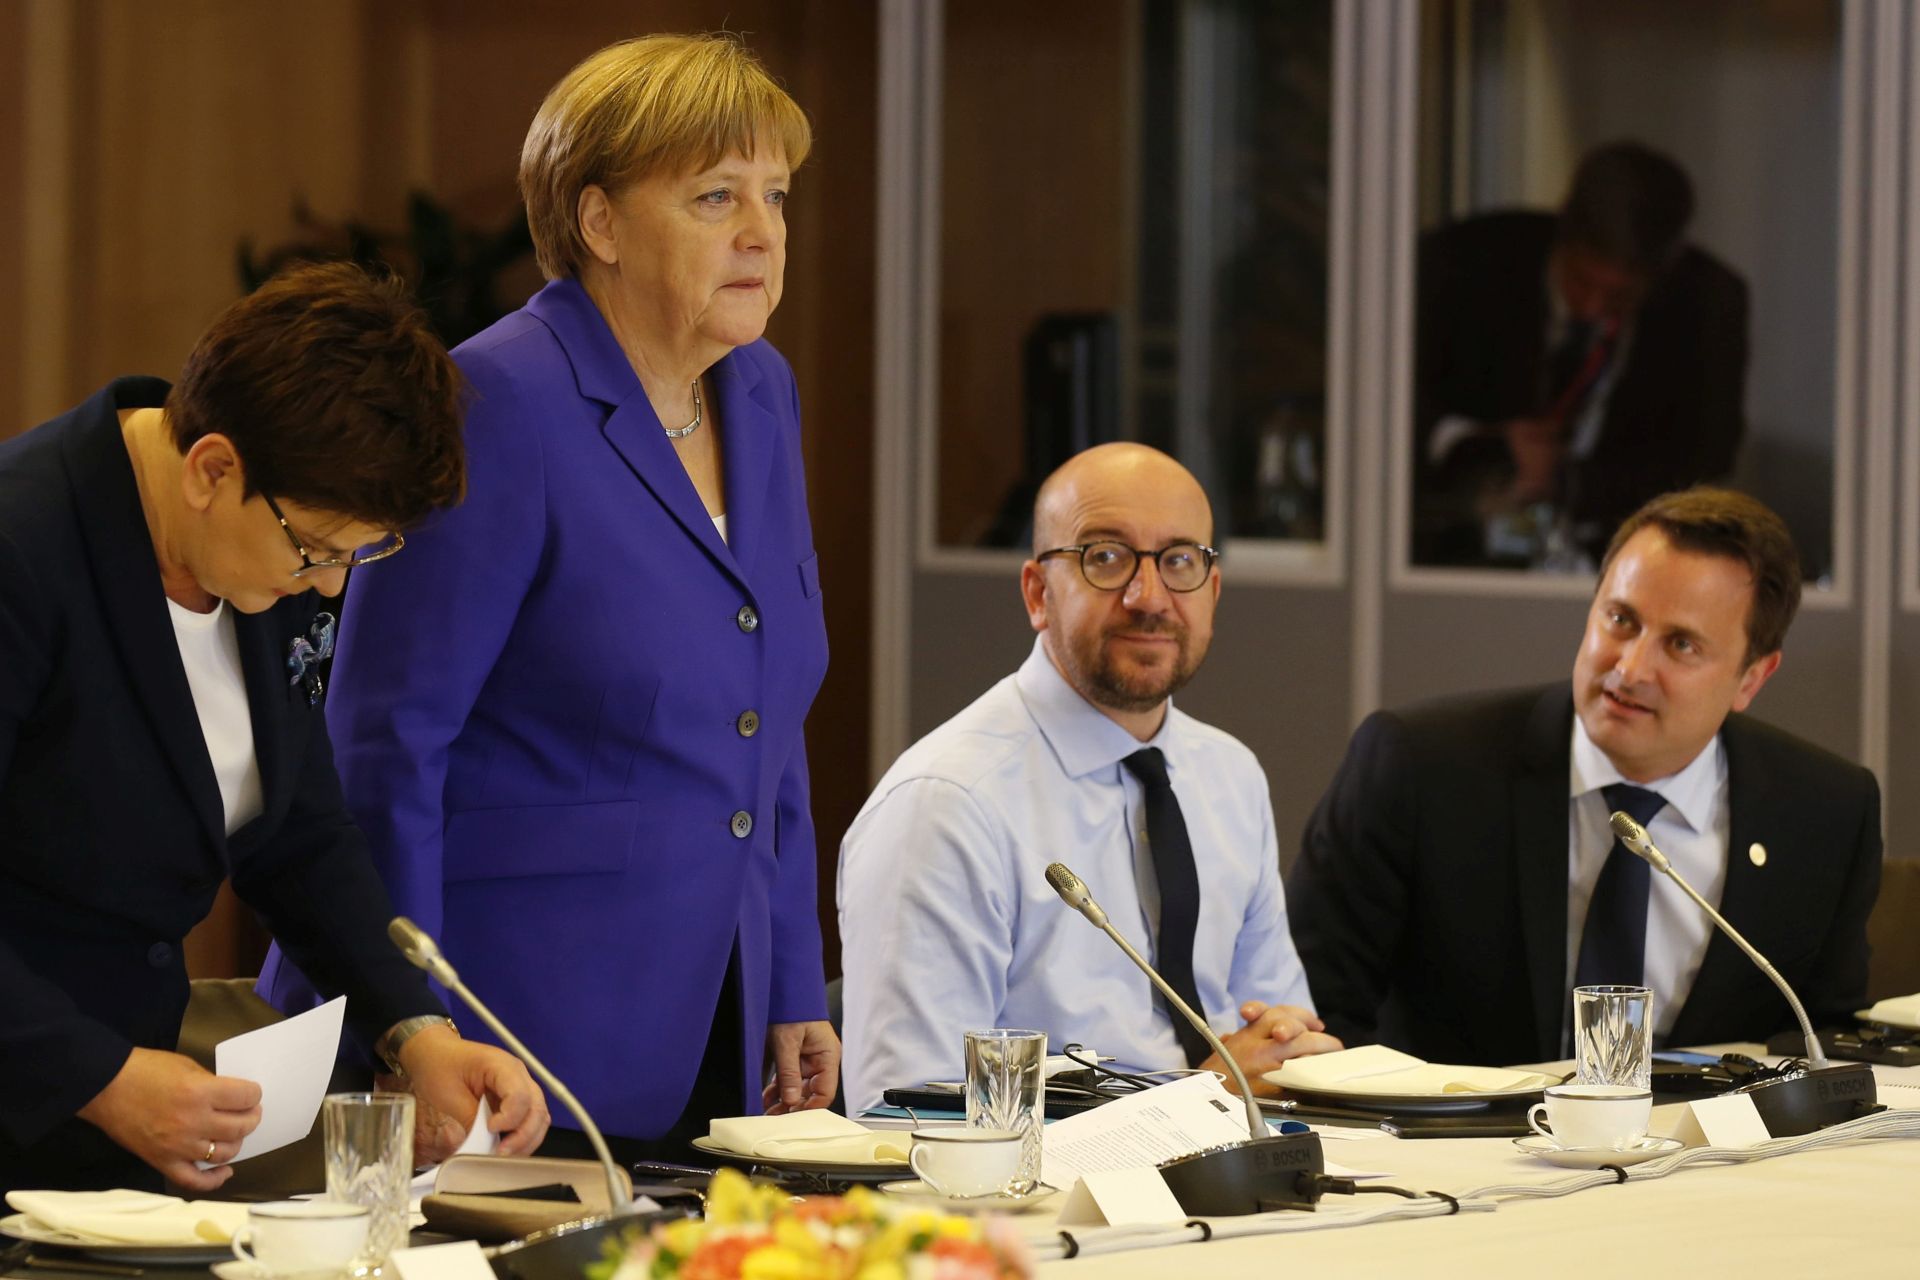 epa05397265 (L-R) Polish Prime Minister Beata Szydlo, German Chancellor Angela Merkel, Belgium Prime Minister Charles Michel and Luxembourg Prime Minister Xavier Bettel, prepare for the start of the second day of the European Council meeting in Brussels, Belgium, 29 June 2016. EU leaders met on 28 June for the first time since the British referendum, in which 51.9 percent voted to leave the European Union.  EPA/PASCAL ROSSIGNOL / POOL